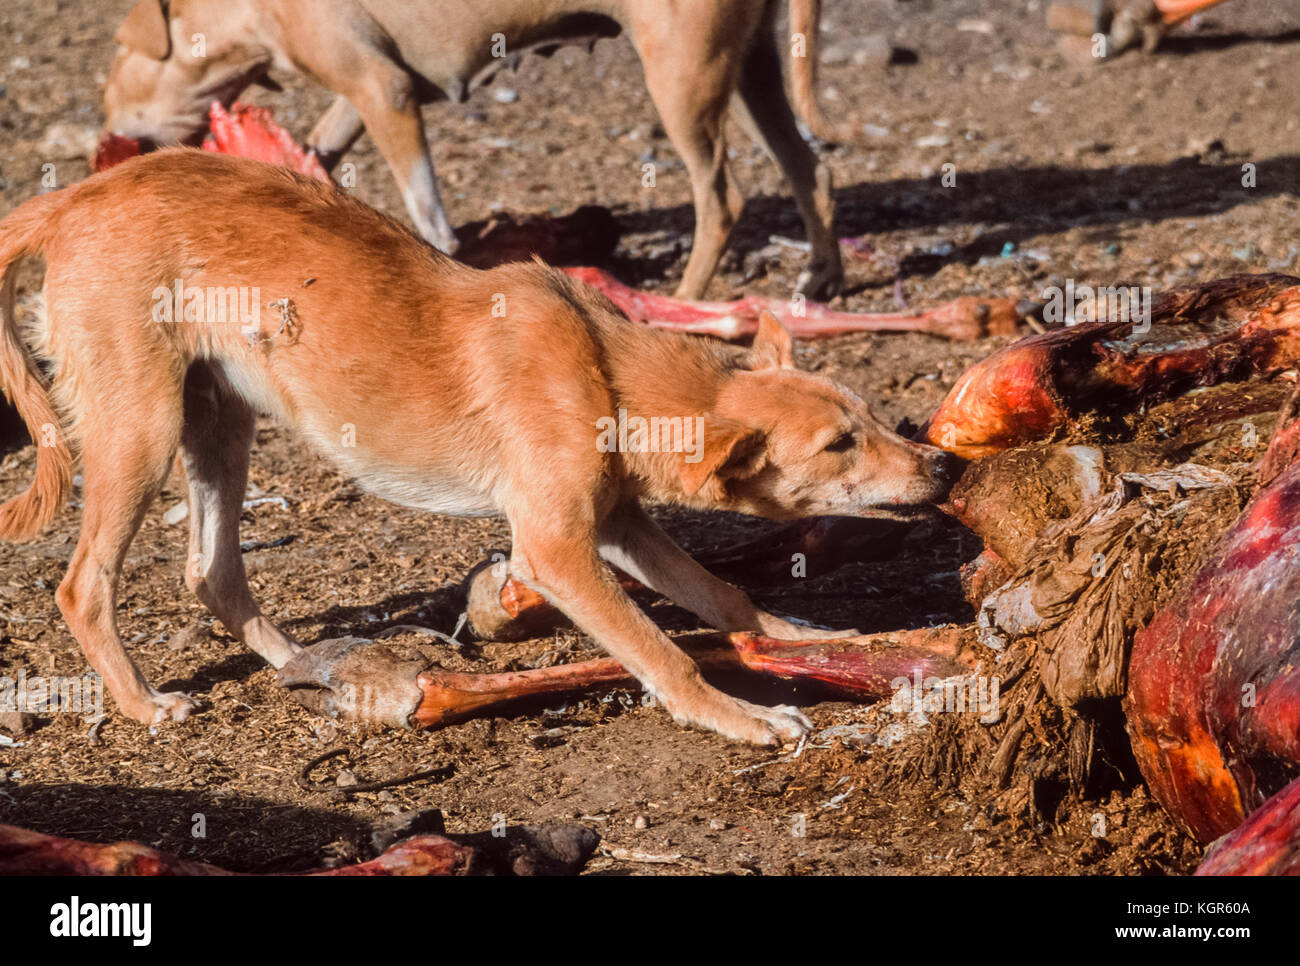 Feral dog, (Canis familiaris or Canis lupus familiaris), scavenging on carcass at animal dump, Rajasthan, India Stock Photo